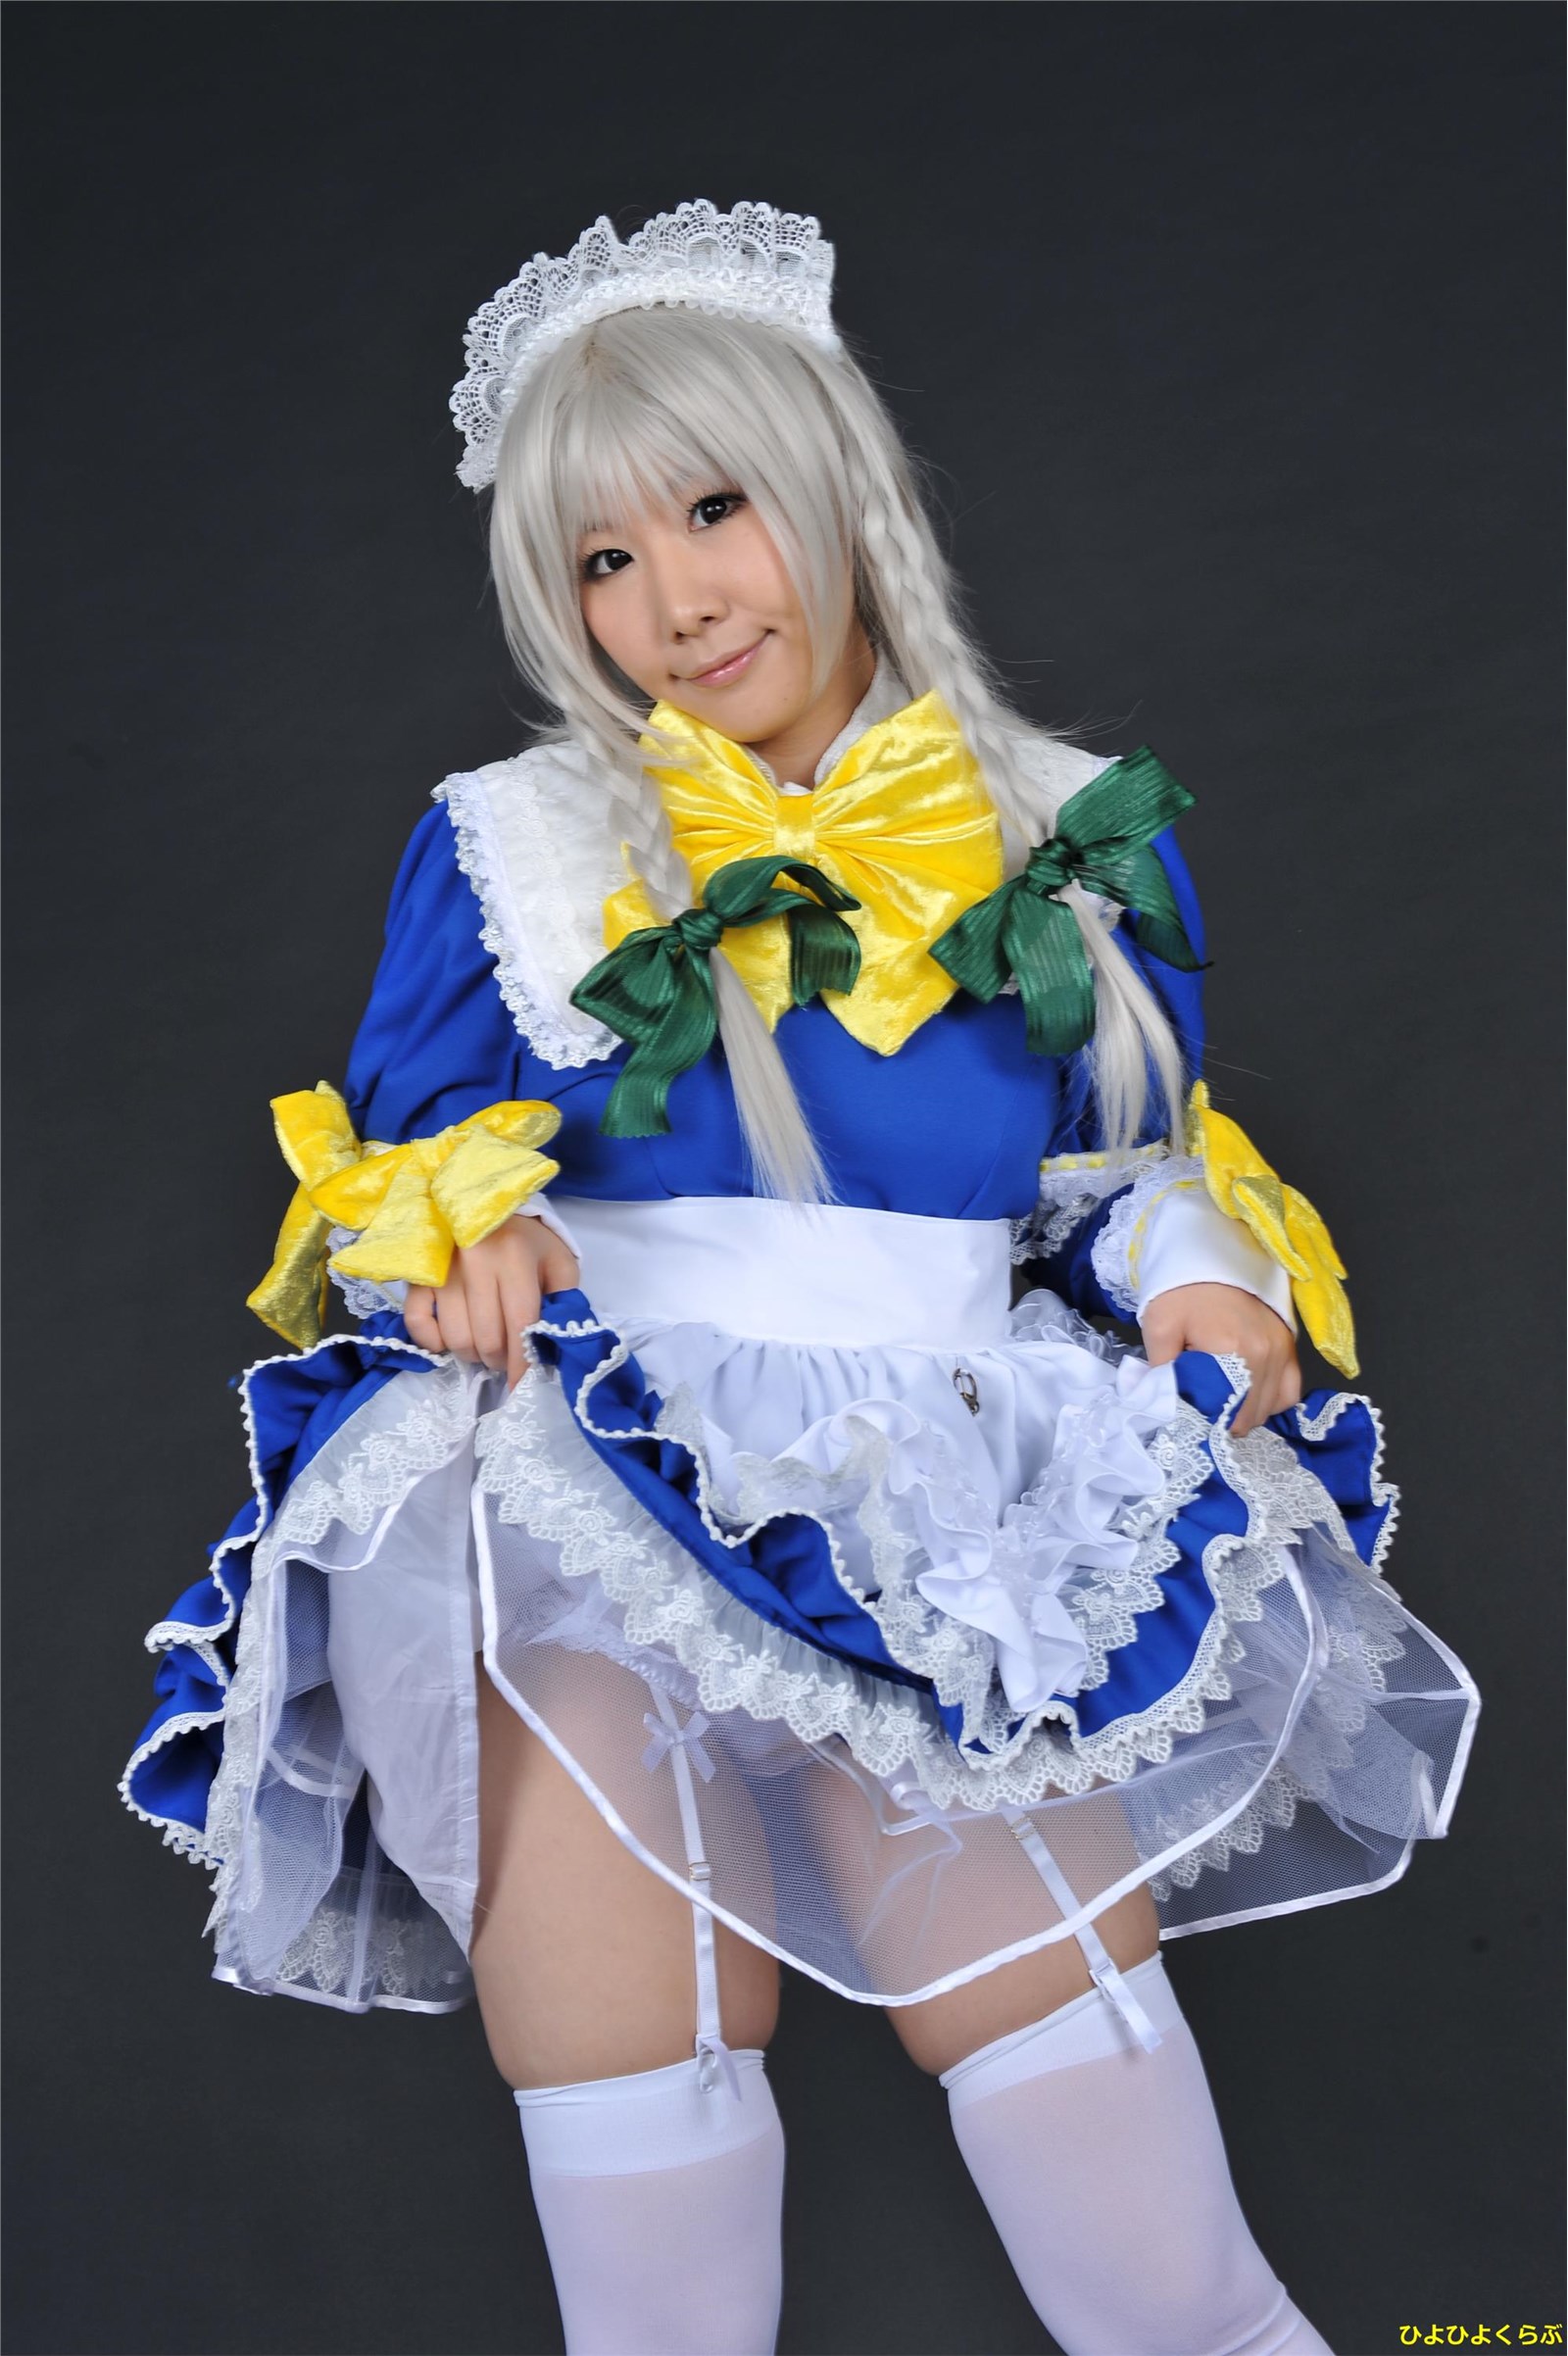 The alluring hiyo nishizuku attracts the audience and her latest ero cosplay(5)